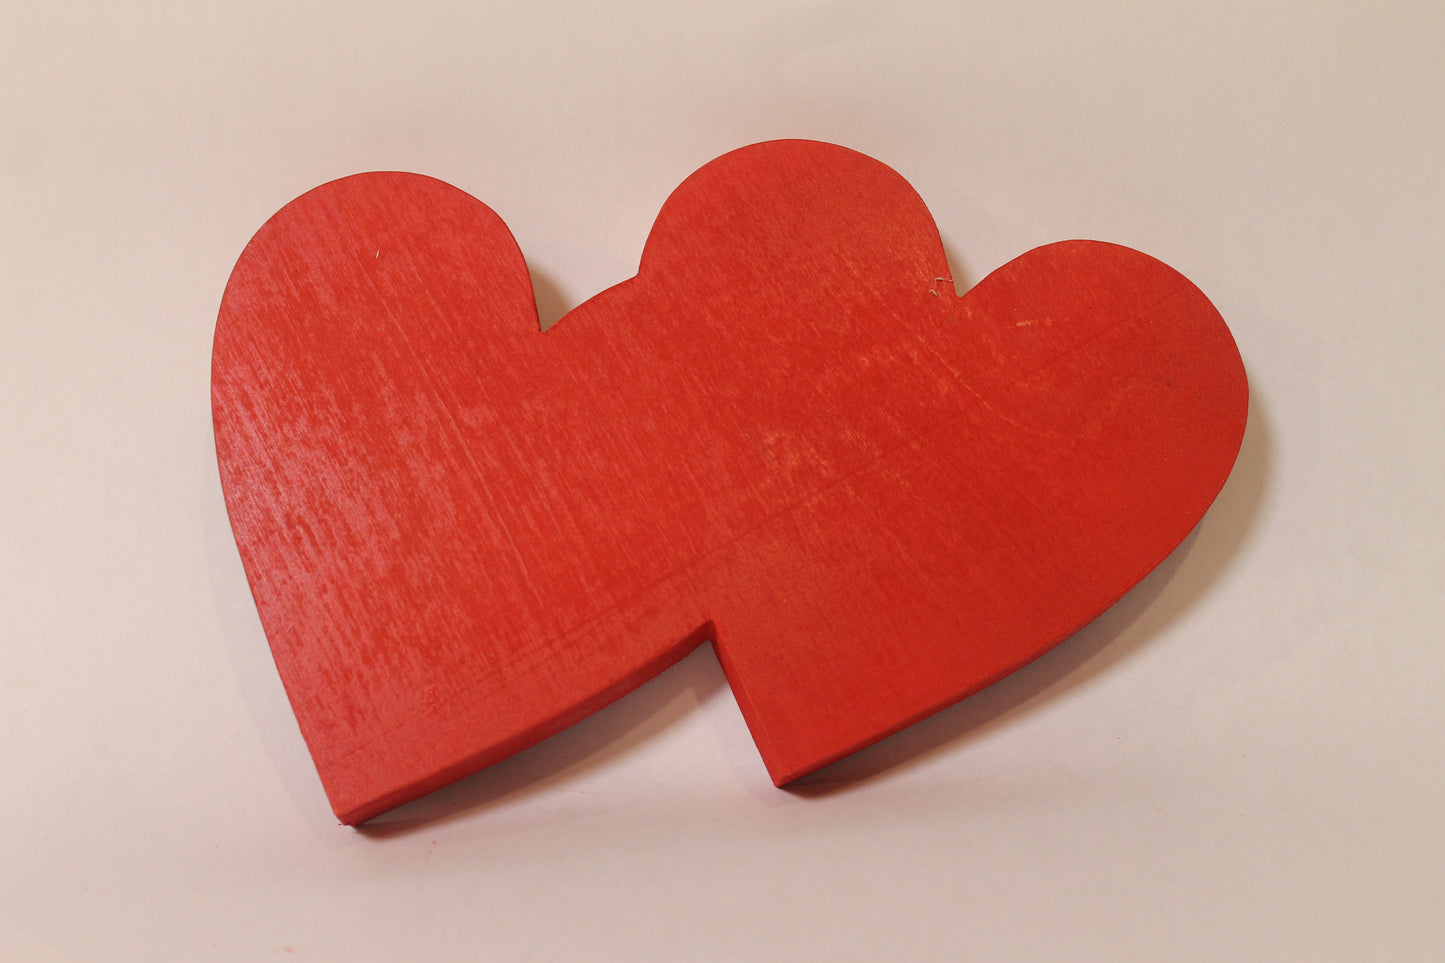 Double heart tray to use as a candy dish or for a catchall